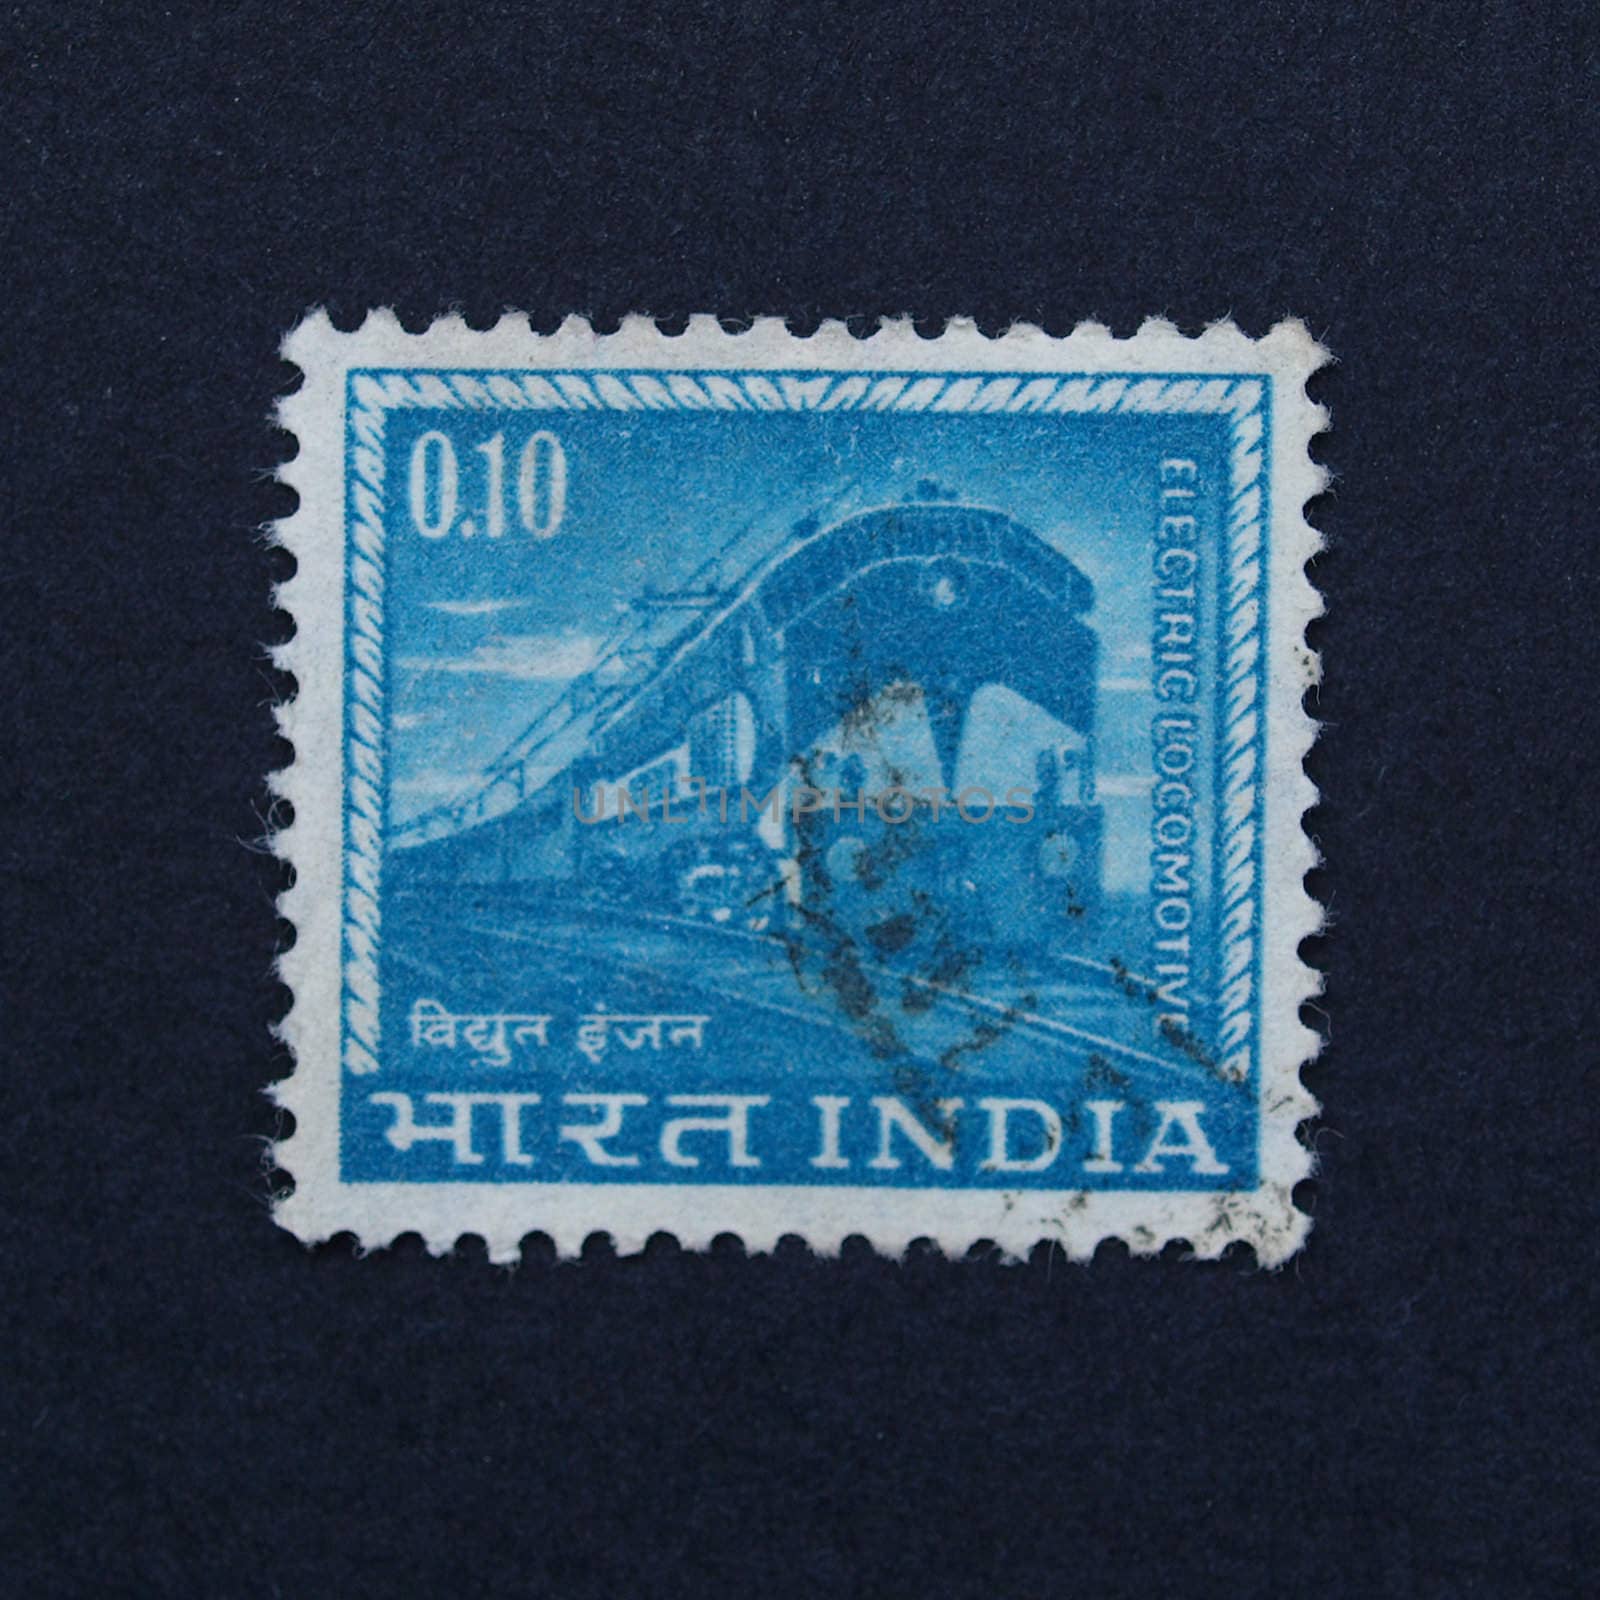 India stamp with train by paolo77